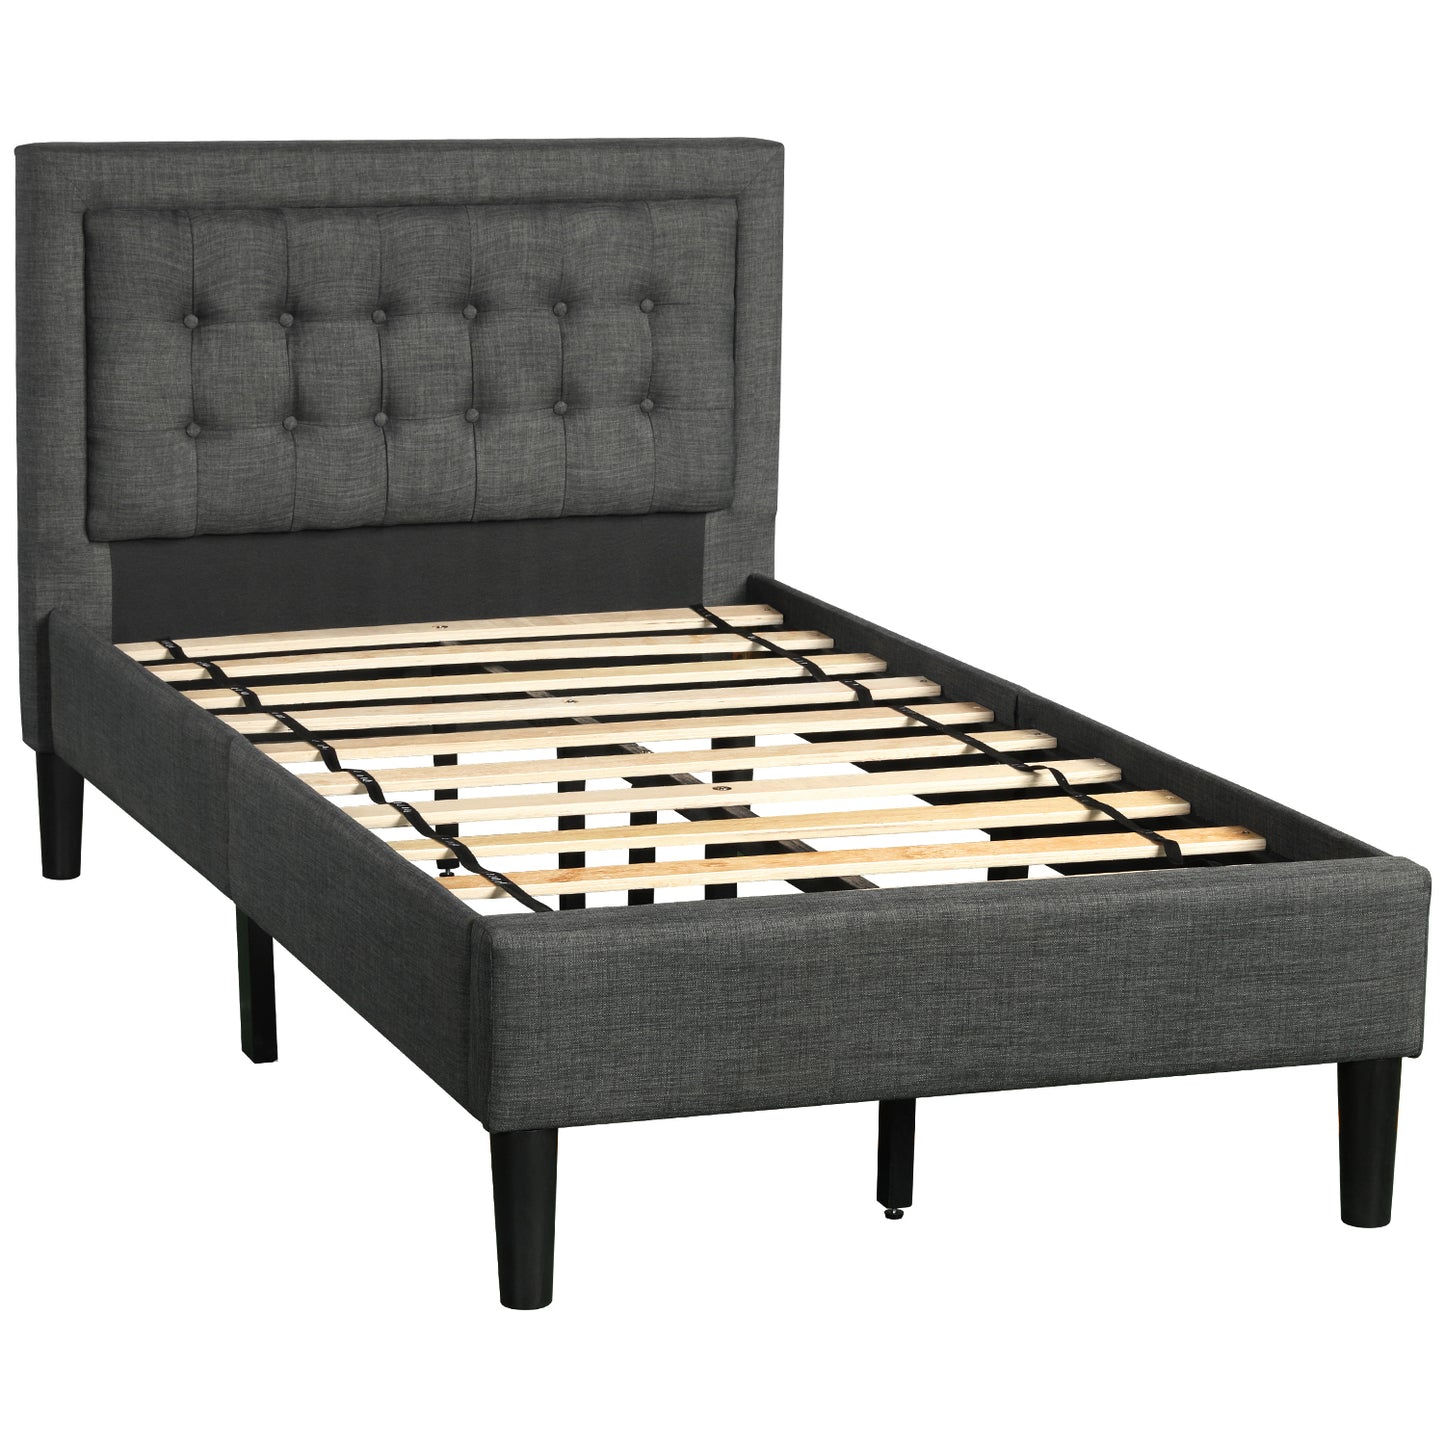 SYNGAR Gray Fabric Upholstered Platform Bed Frame Twin Size with Button Tufted Headboard, Wood Frame Mattress Foundation with Strong Wooden Slat Support, No Box Spring Needed, Easy Assembly